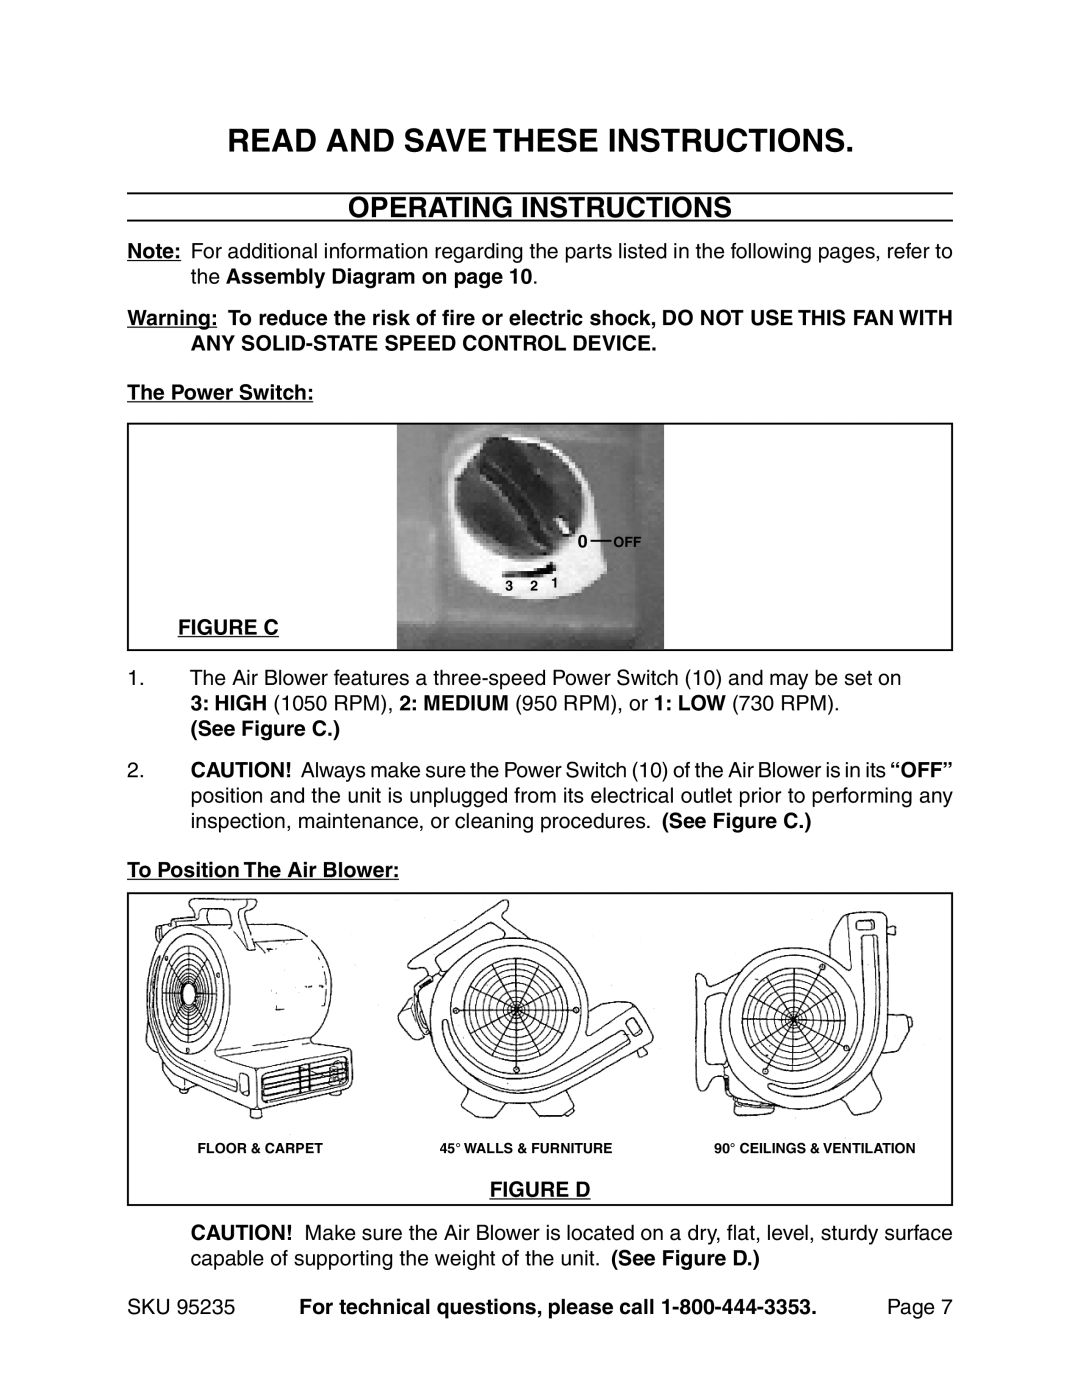 Chicago Electric 95235 manual Read and save these instructions, Operating Instructions 